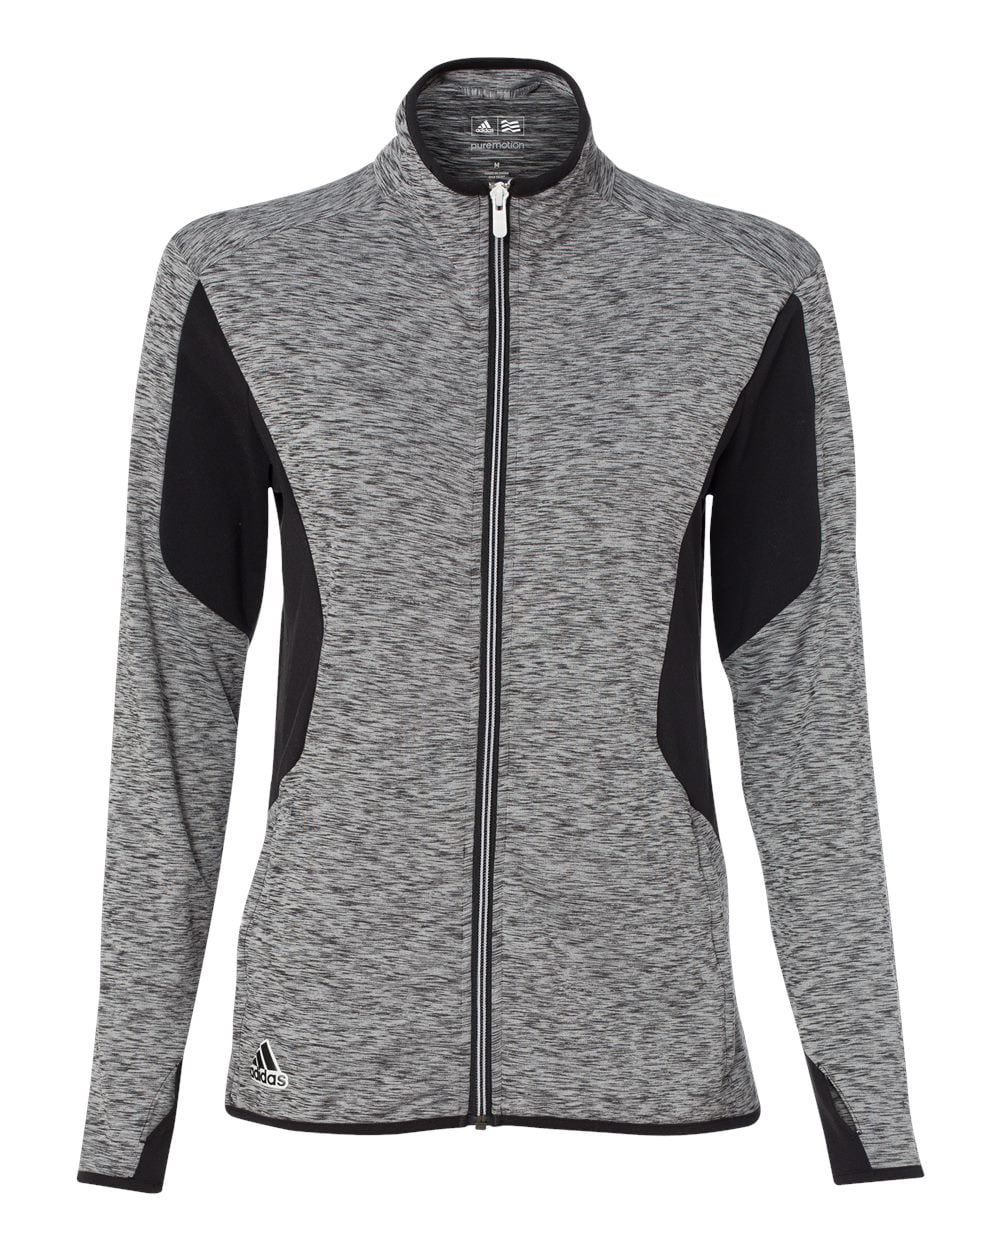 adidas - Adidas - Golf Women's Space Dyed Full-Zip Jacket - A199 ...